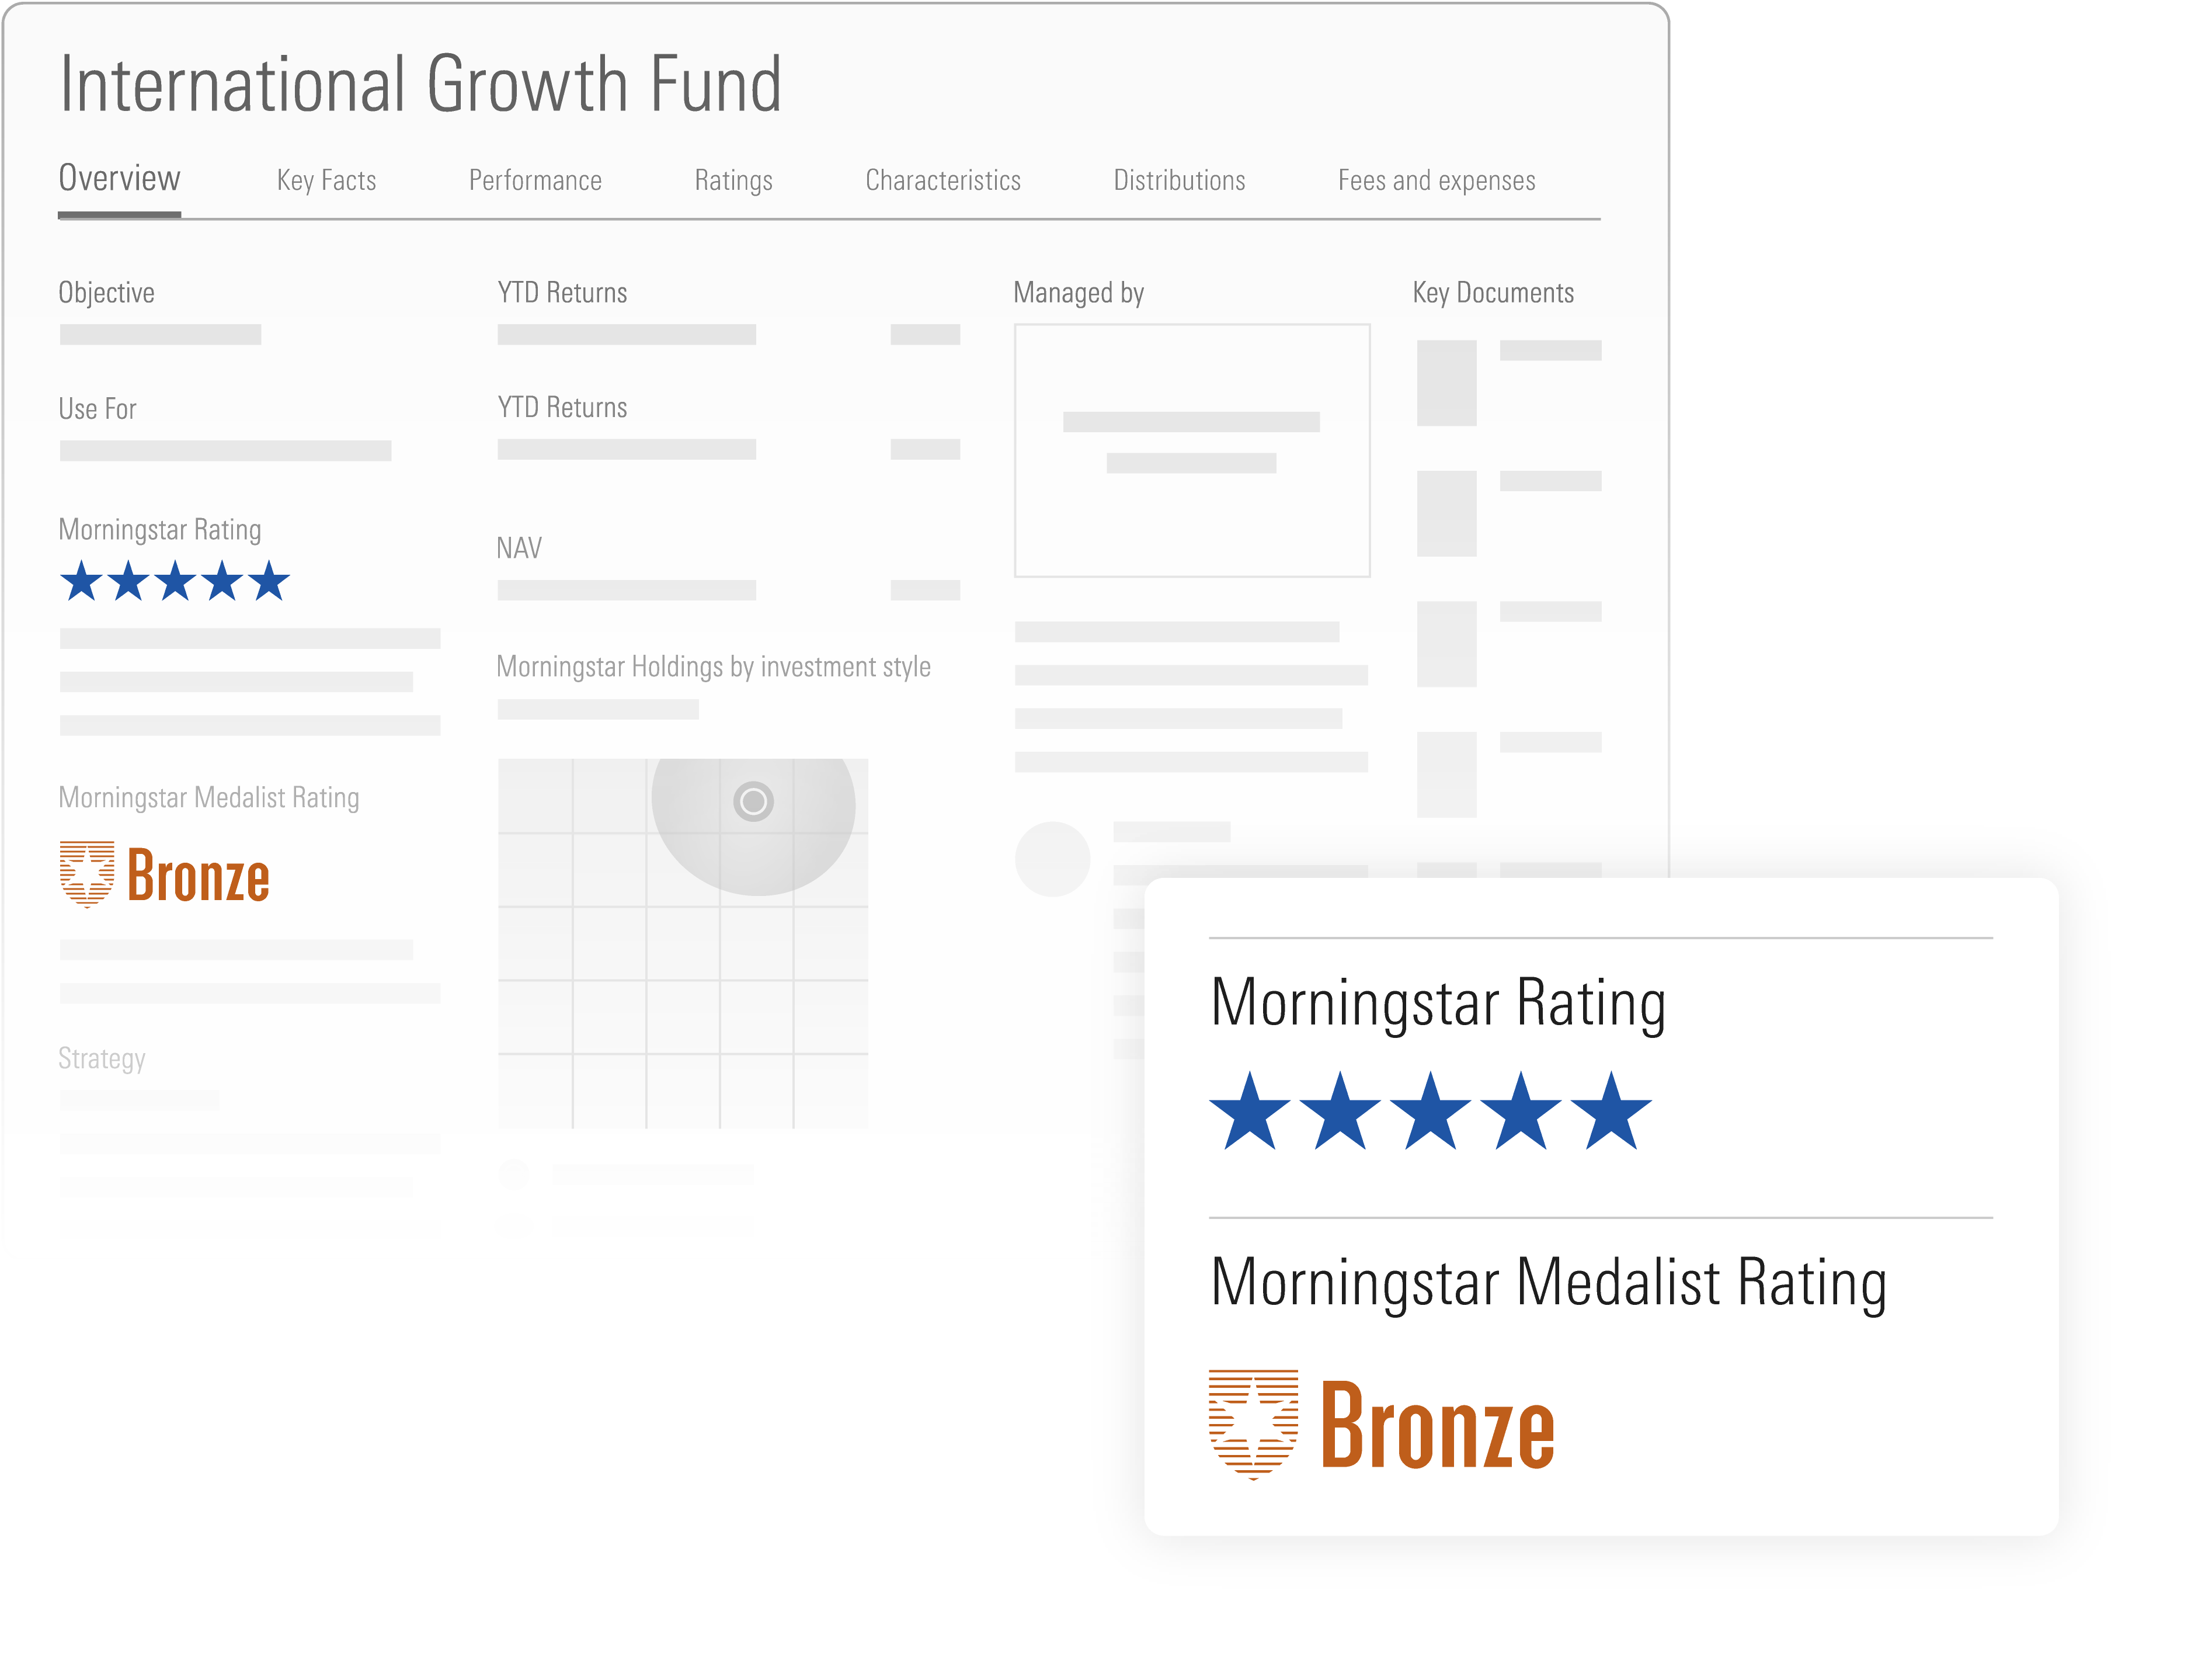 Illustration of a fund manager's website that markets investment products with Morningstar ratings and visualizations.